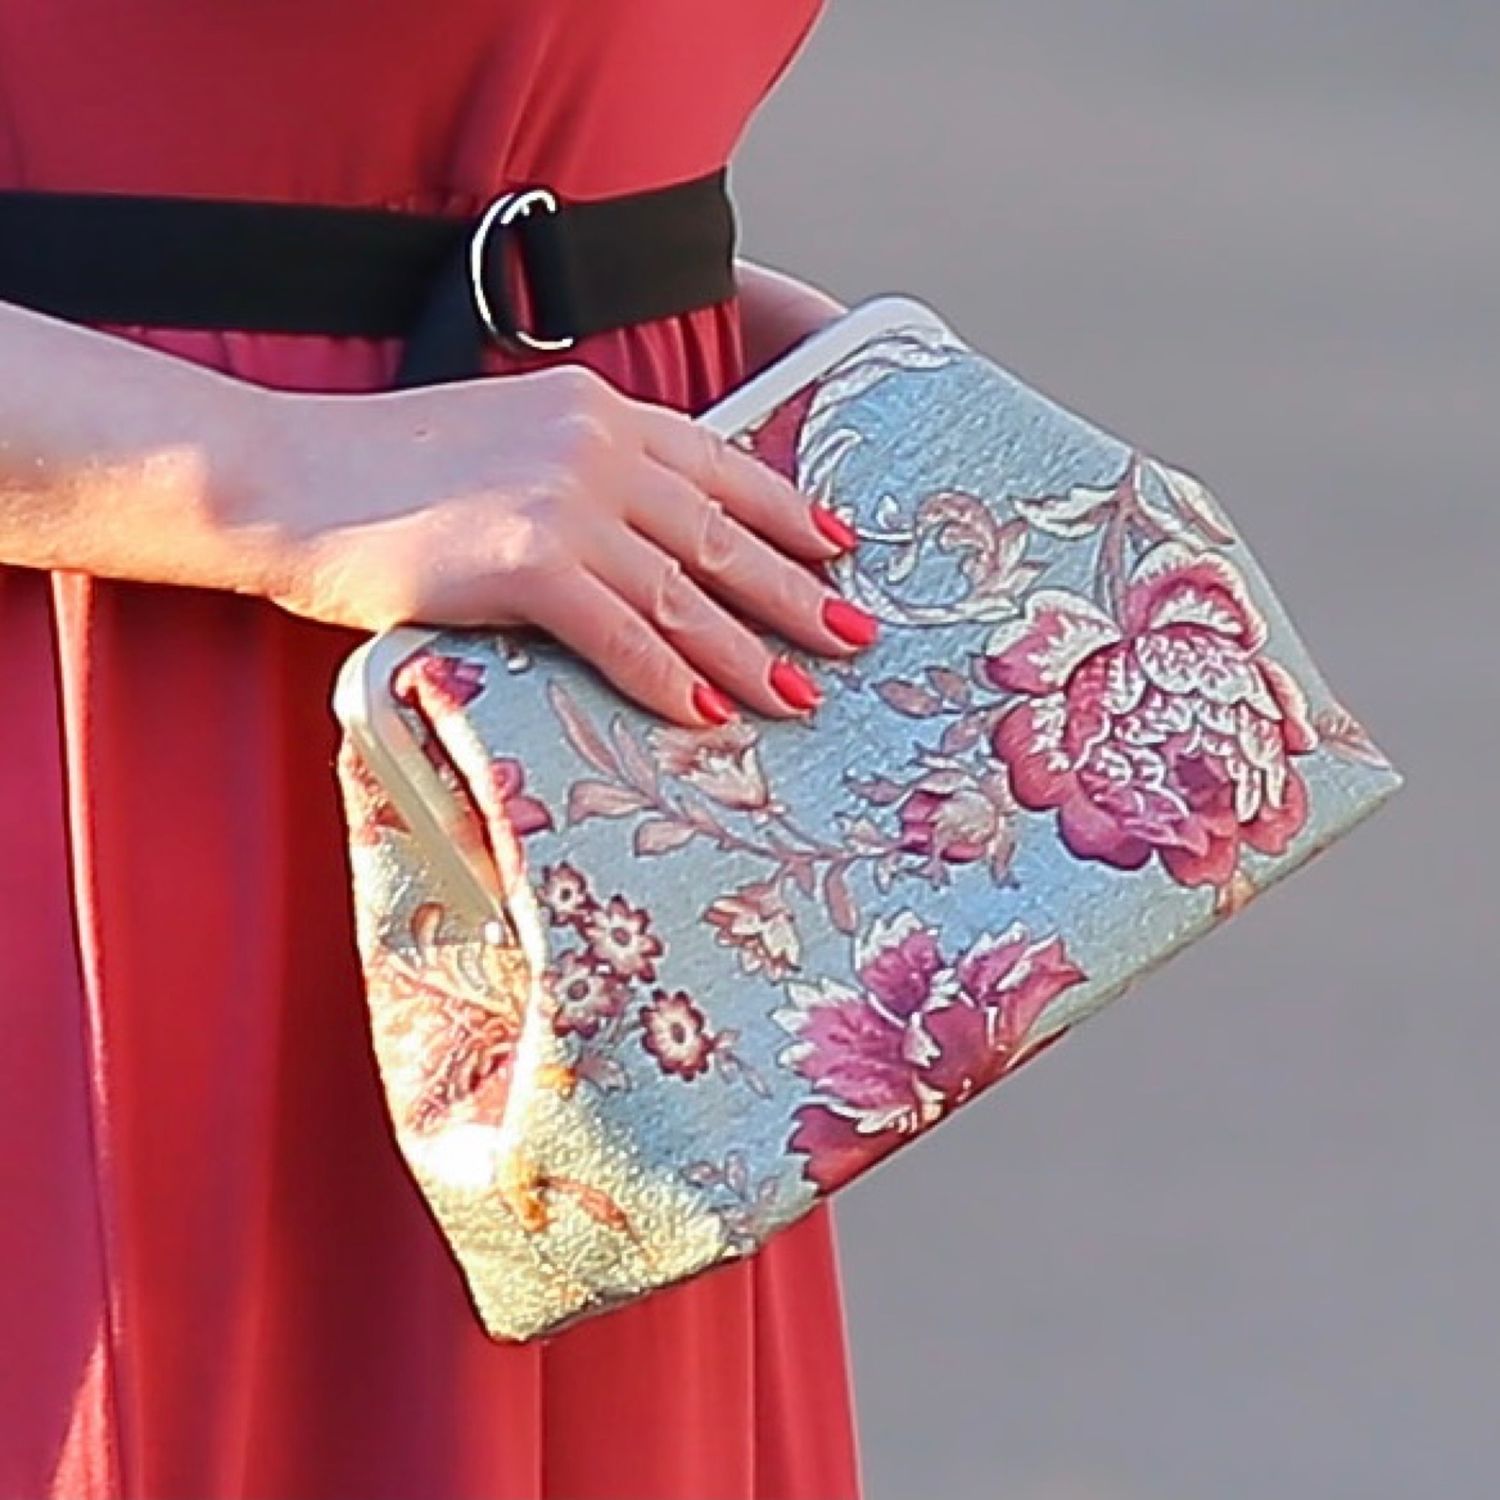 In stock! Clutch Floral textile on the clasp, Clutches, Moscow,  Фото №1